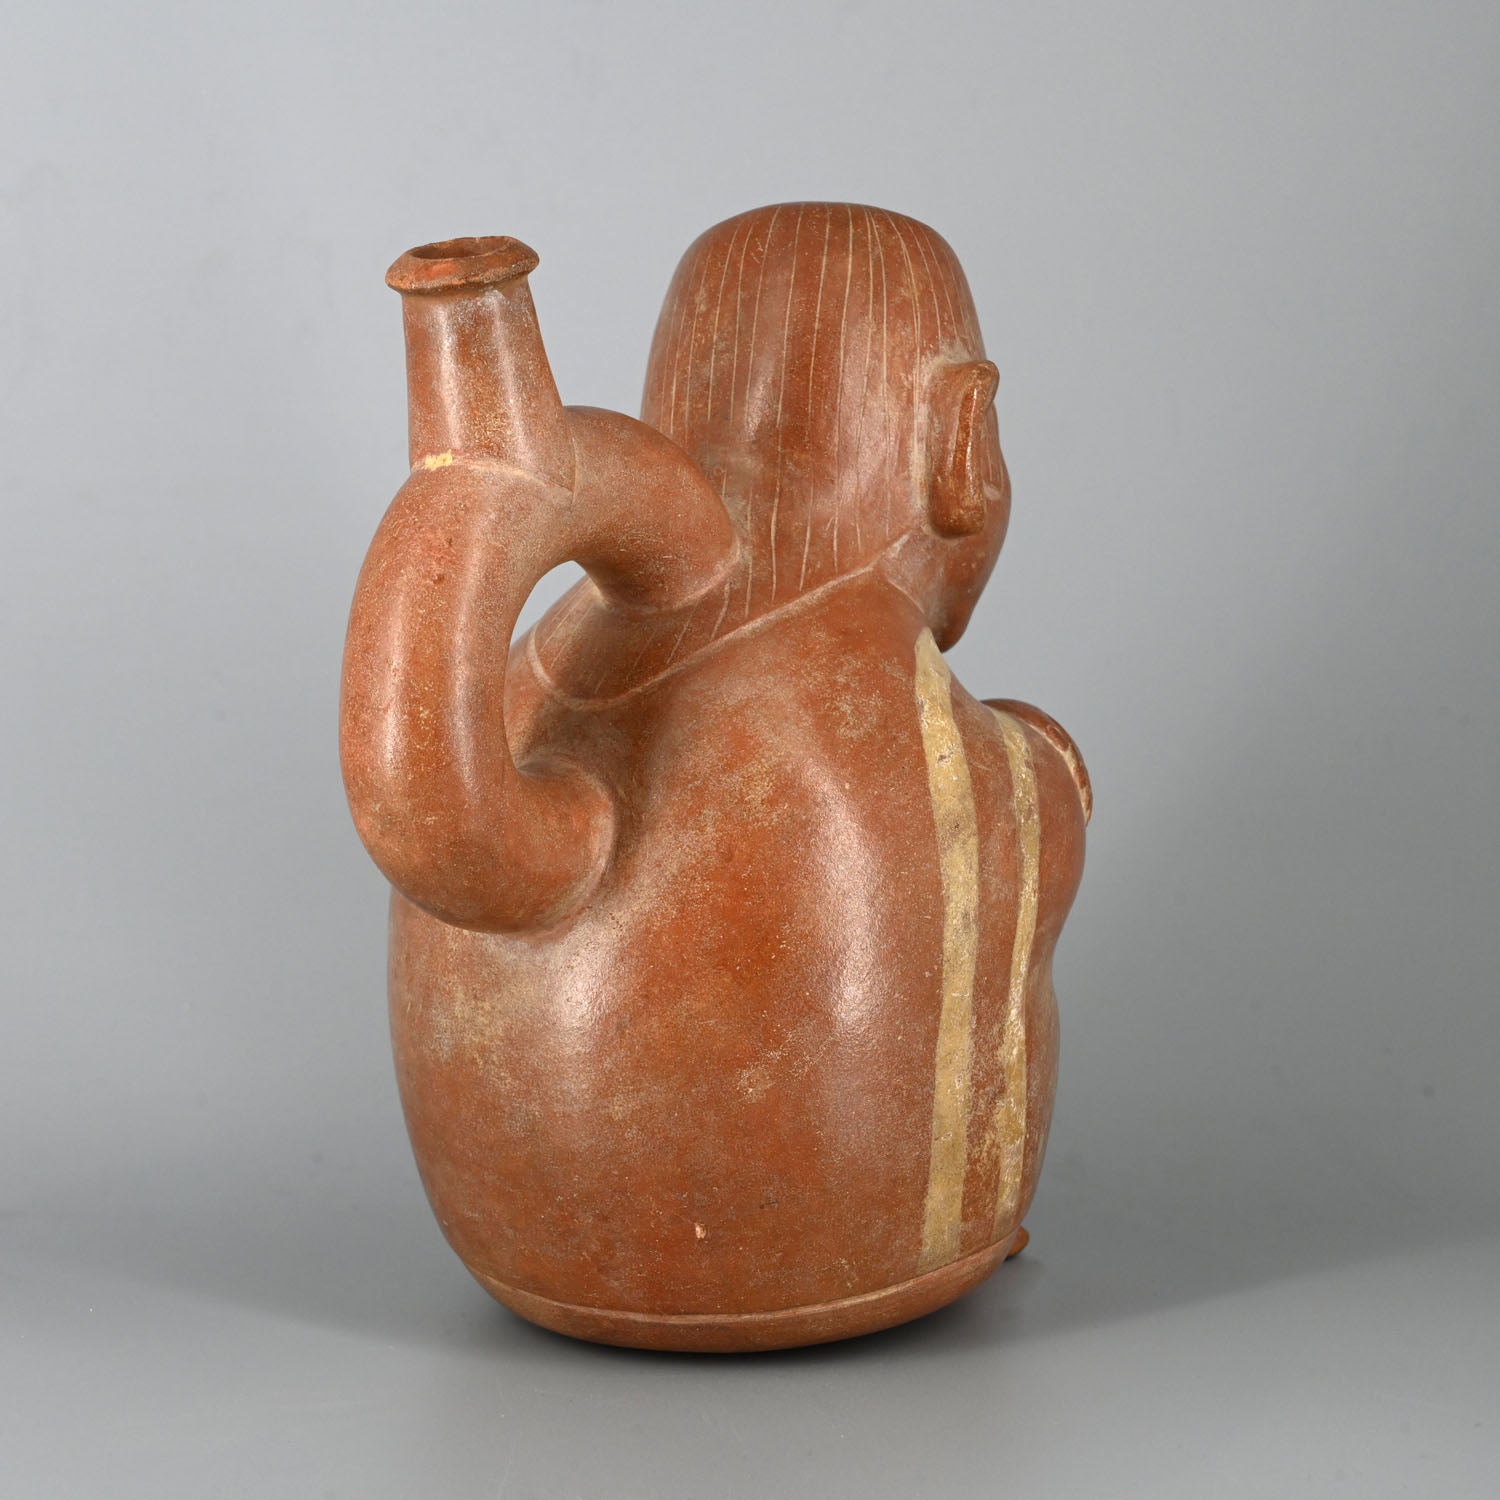 A Moche Stirrup Bottle with a Seated Man, ca. 200 - 400 CE